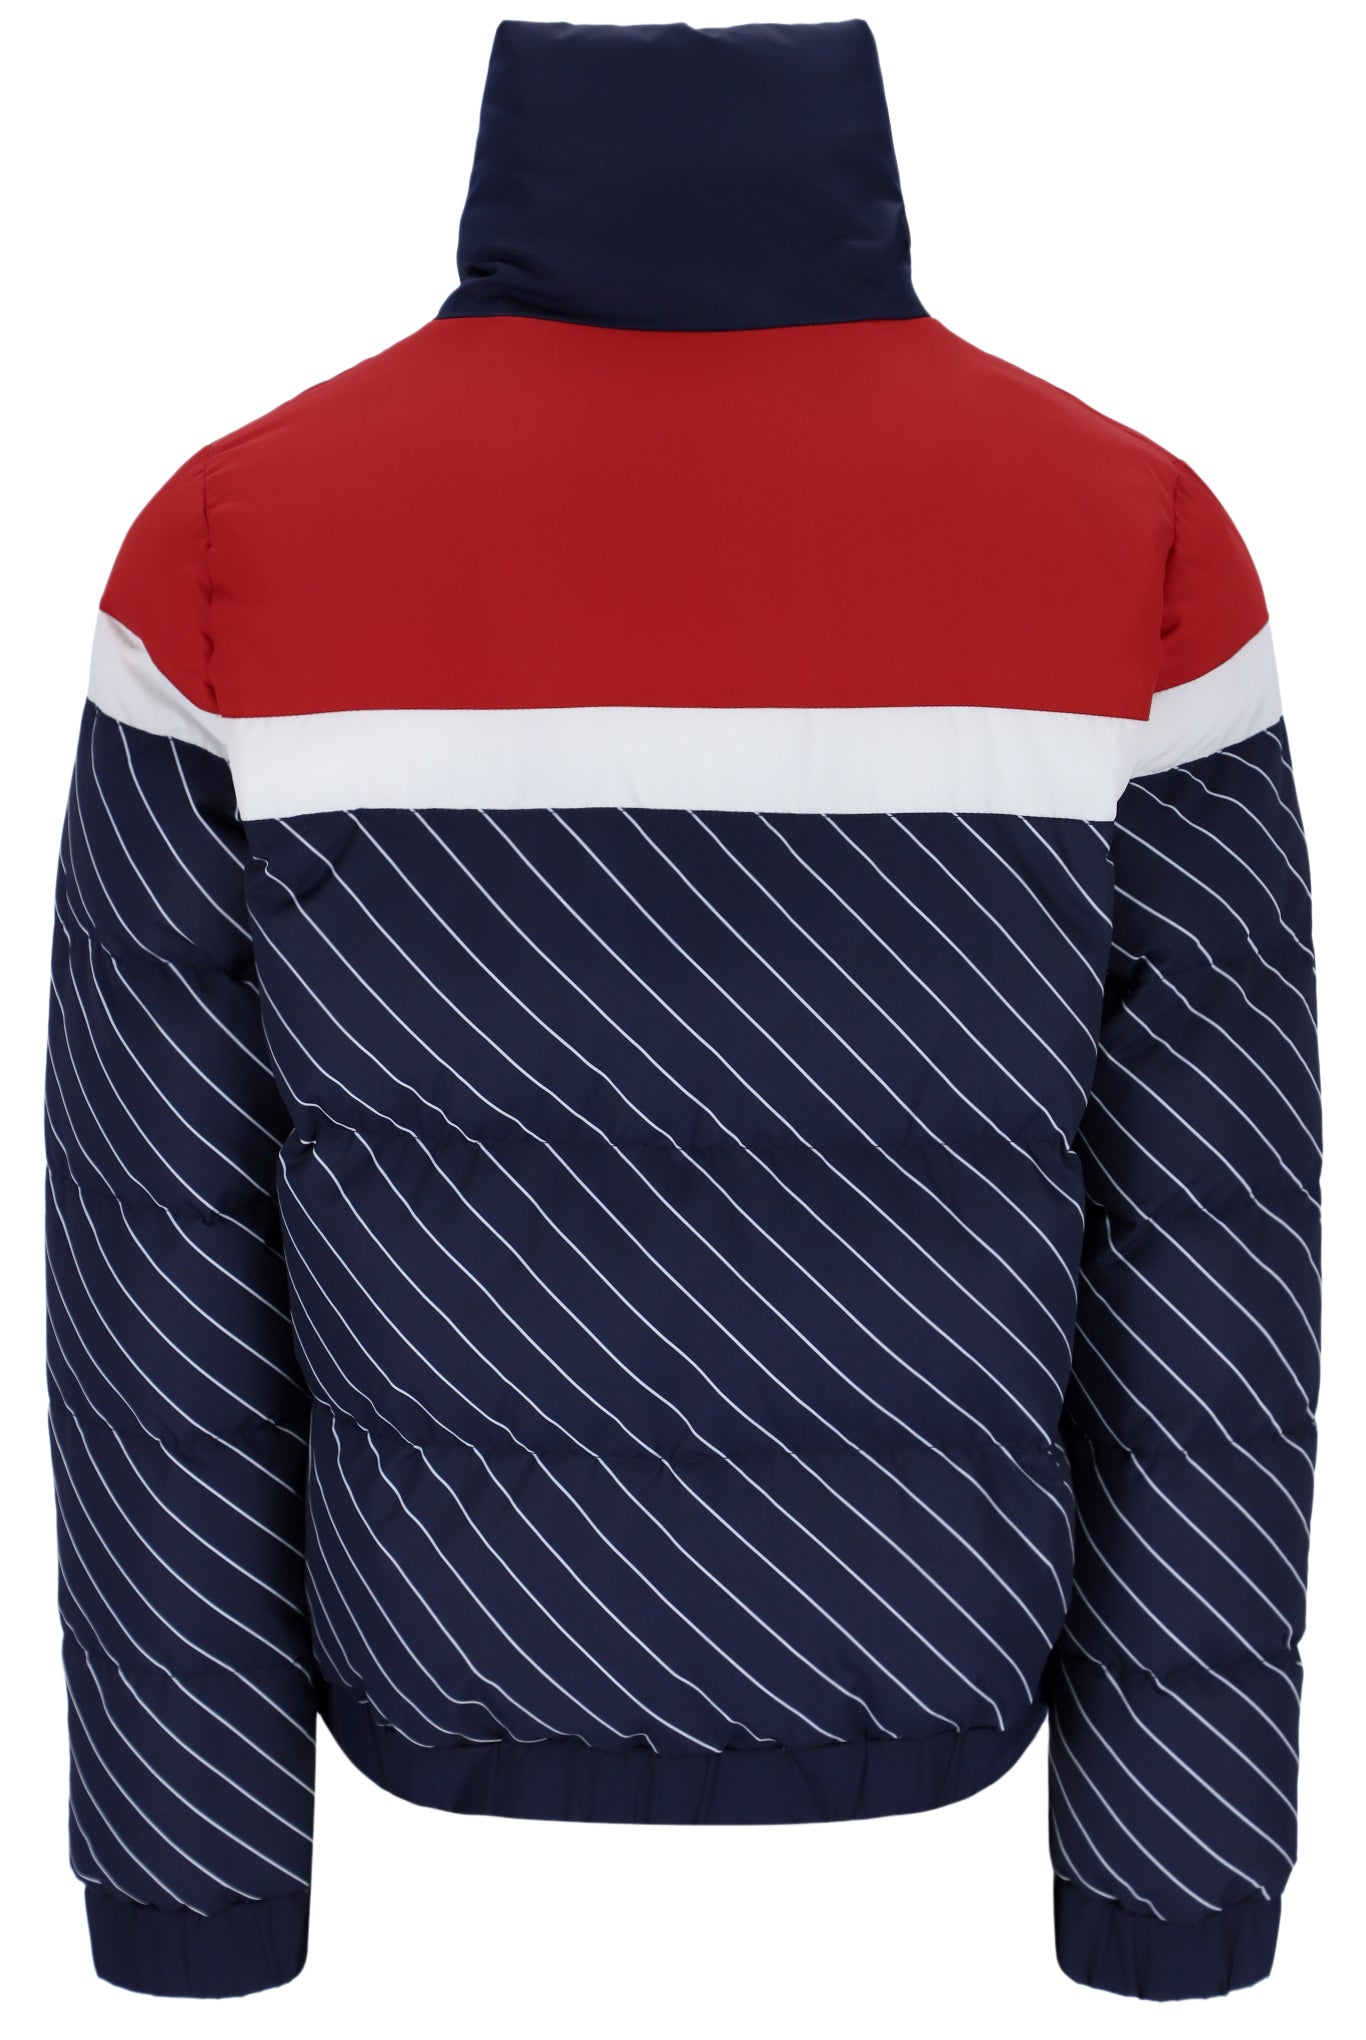 Ladies Lottie Puffa Jacket Navy/White/Red-Ghost Back View